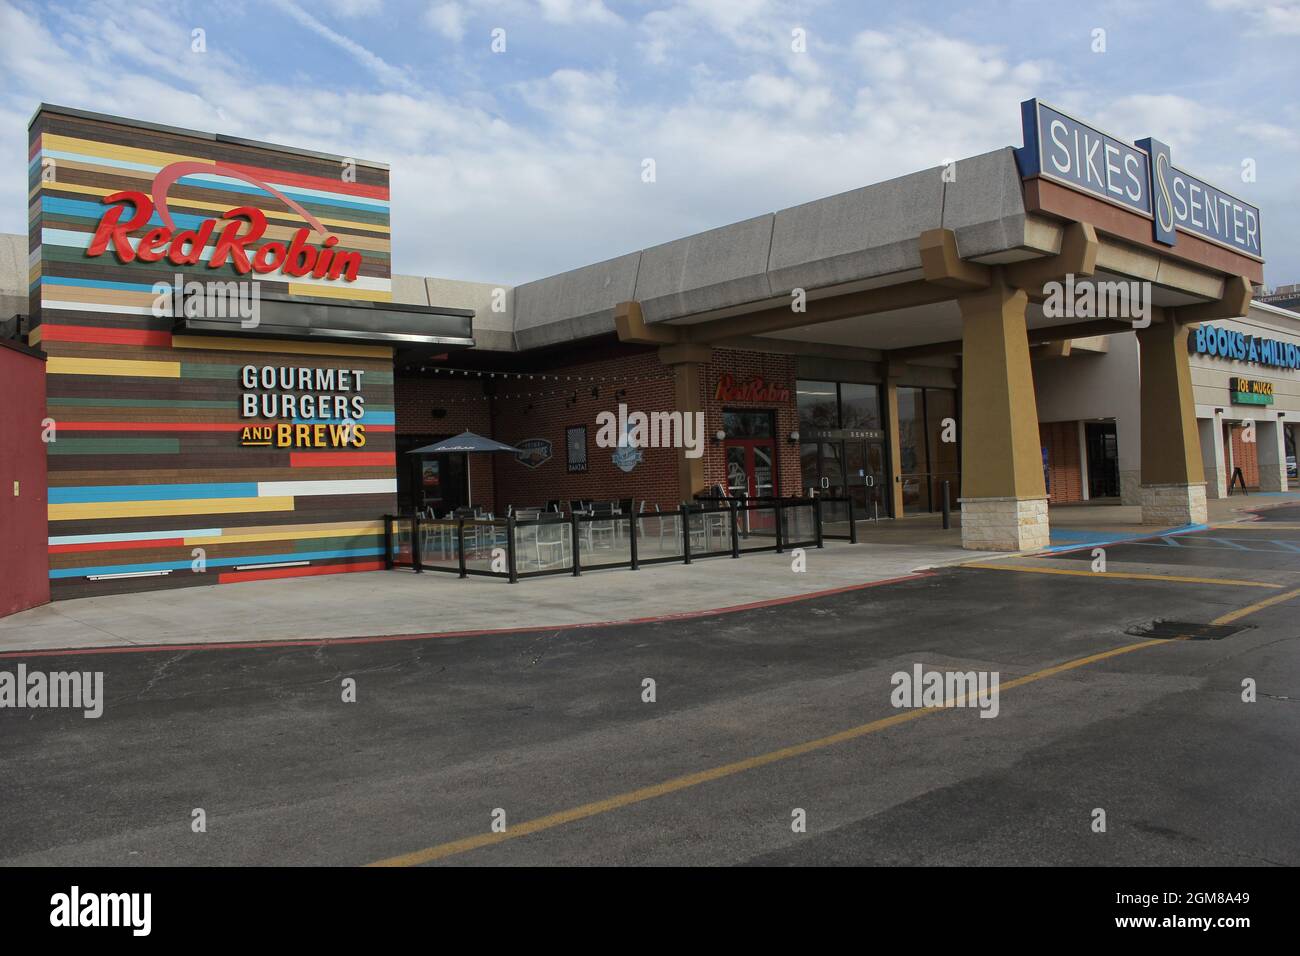 Wichita Falls, TX - February 8, 2019: Red Robin Restaurant located in the Sikes Senter Mall Stock Photo